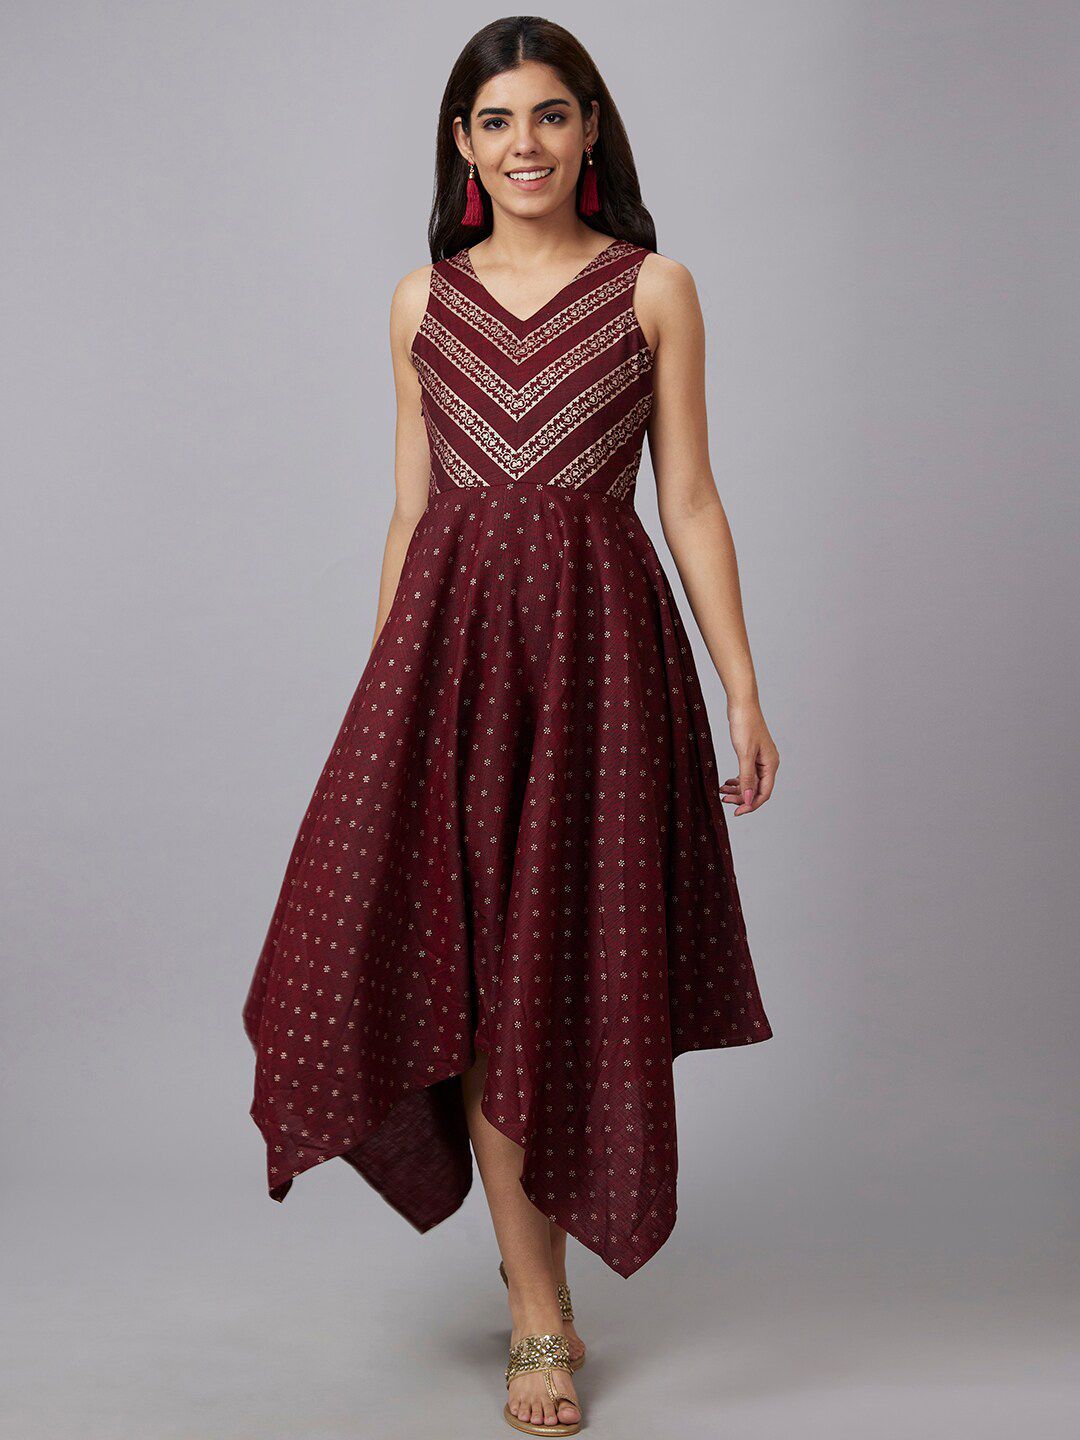 Globus Red Ethnic Motifs Printed V-Neck Fit and Flare Maxi Dress Price in India